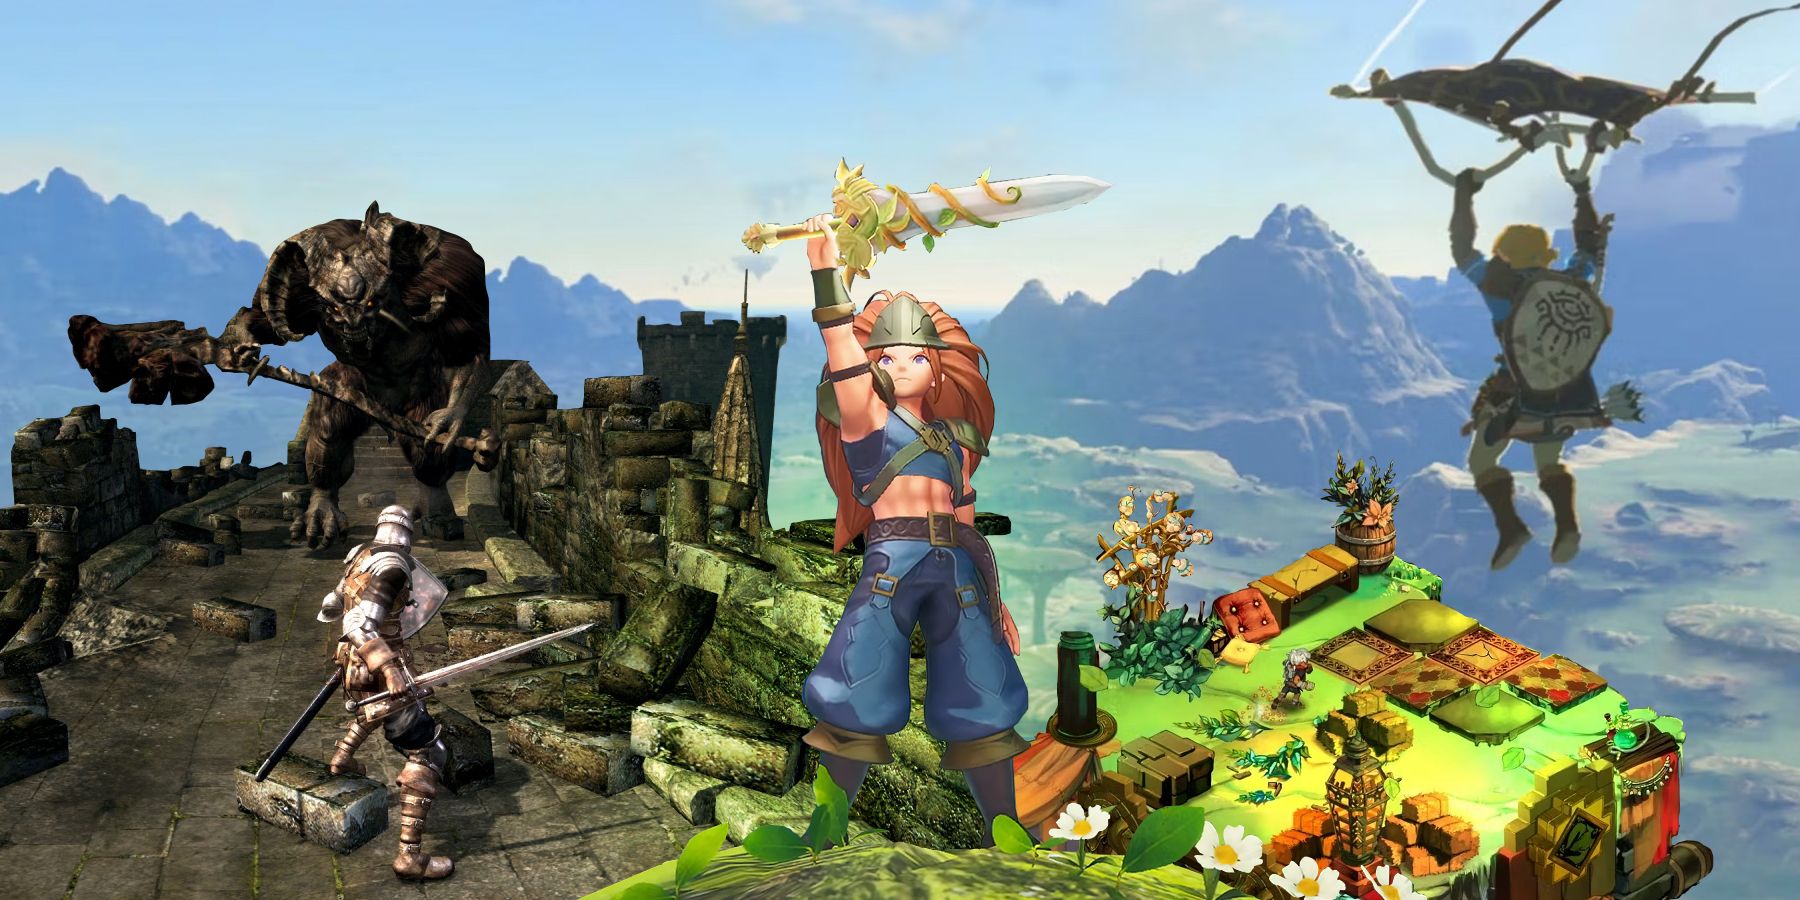 Bastion, Legend Of Zelda Breath of the Wild, Dark Souls Remastered, Trials Of Mana are among The 25 Best Action-RPGs On The Nintendo Switch